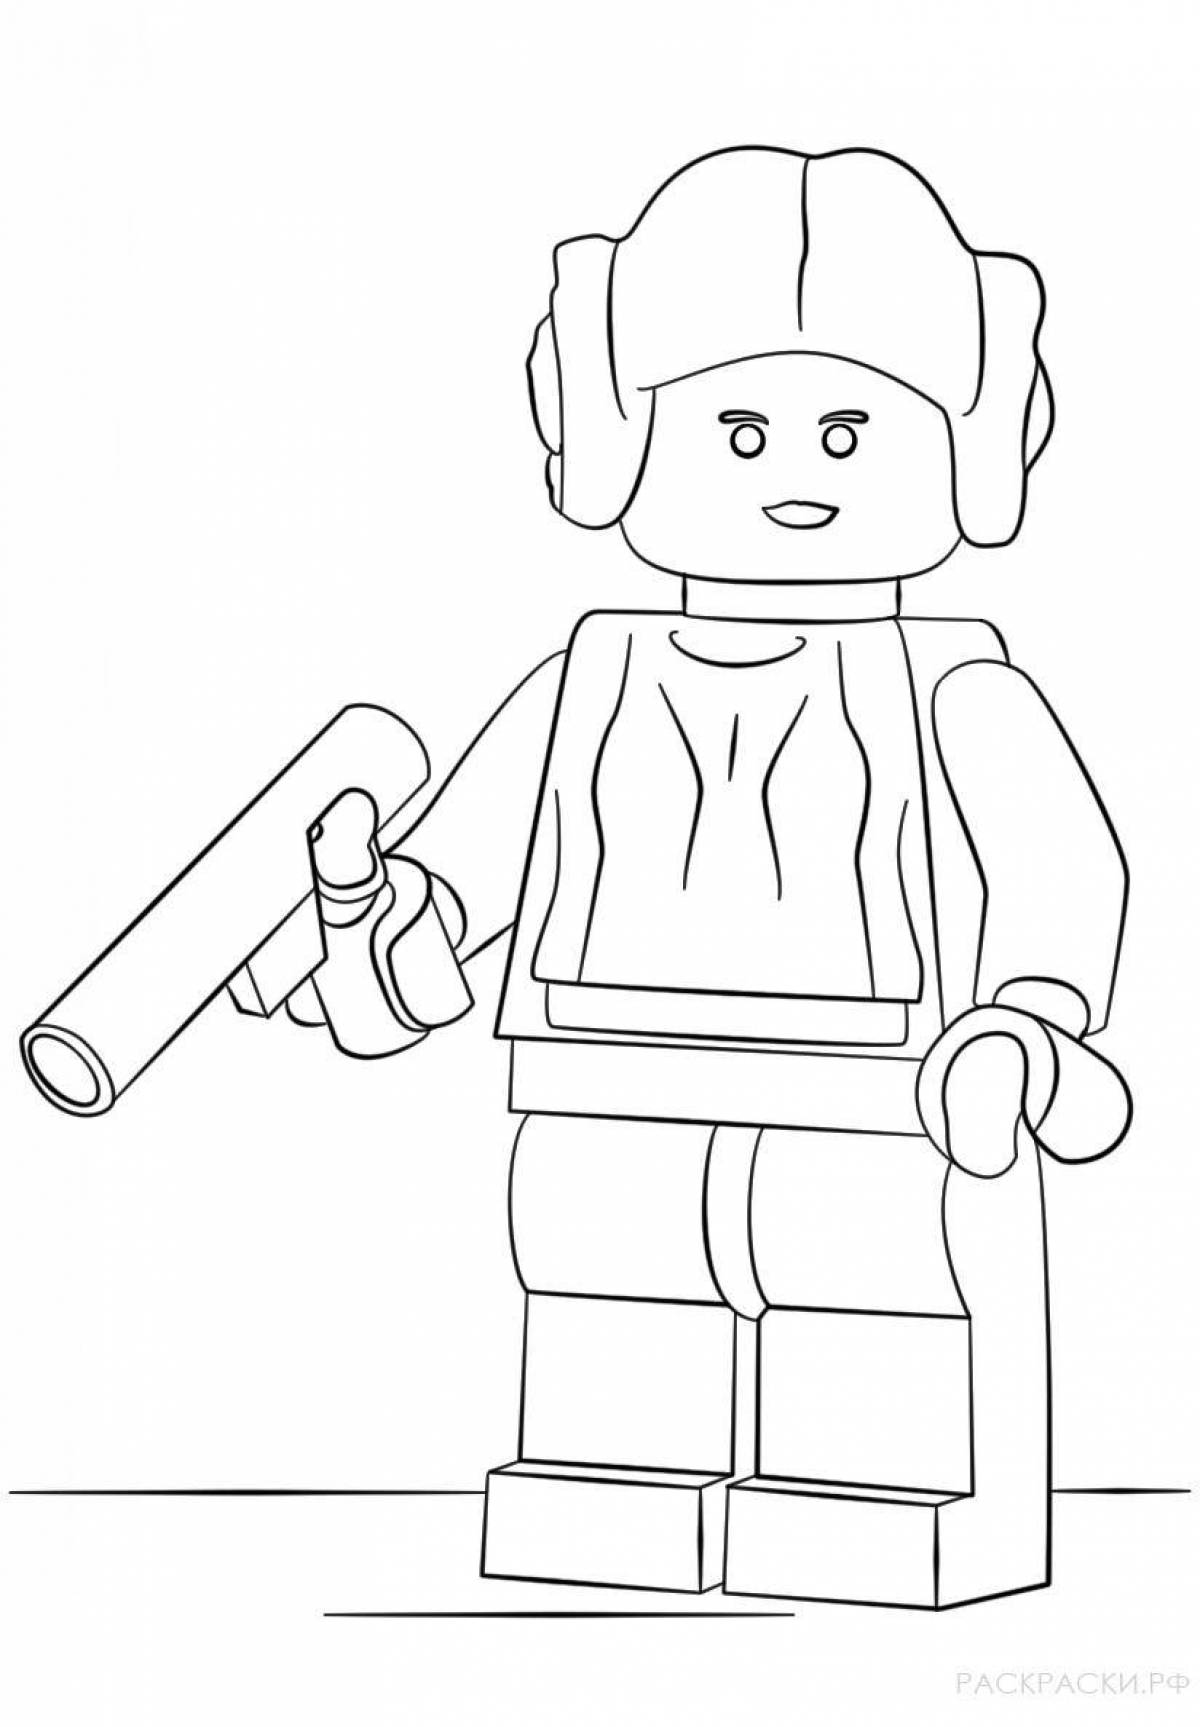 Playful lego toy soldiers coloring page